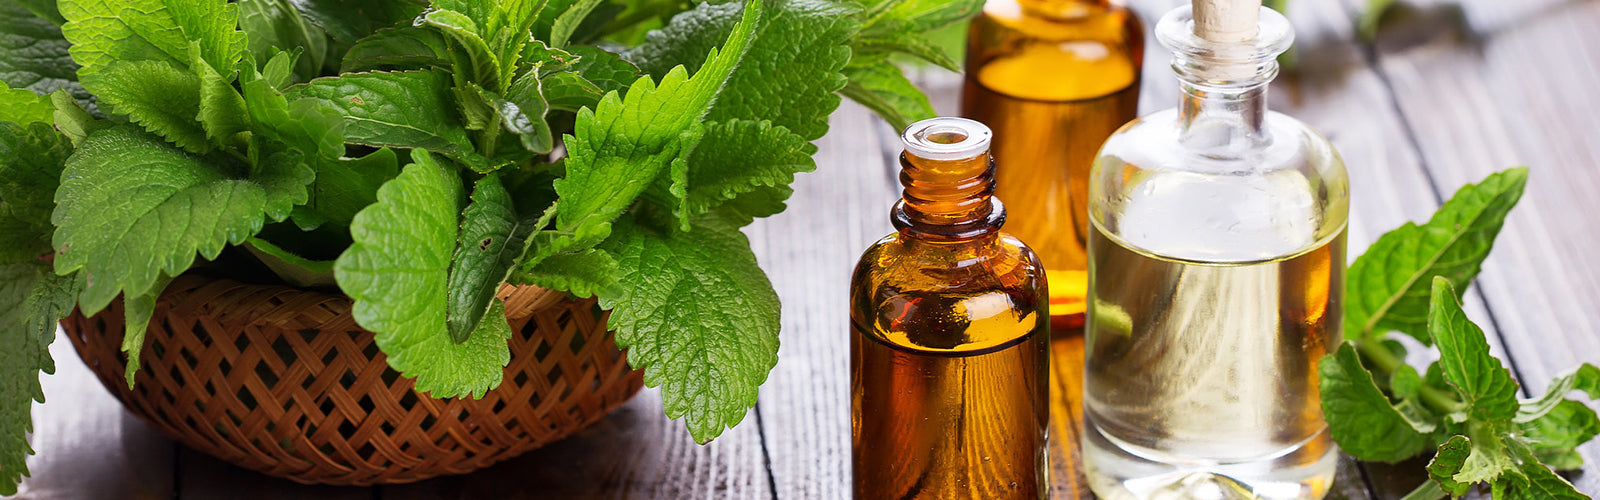 Global Essential Oils Market Research 2020